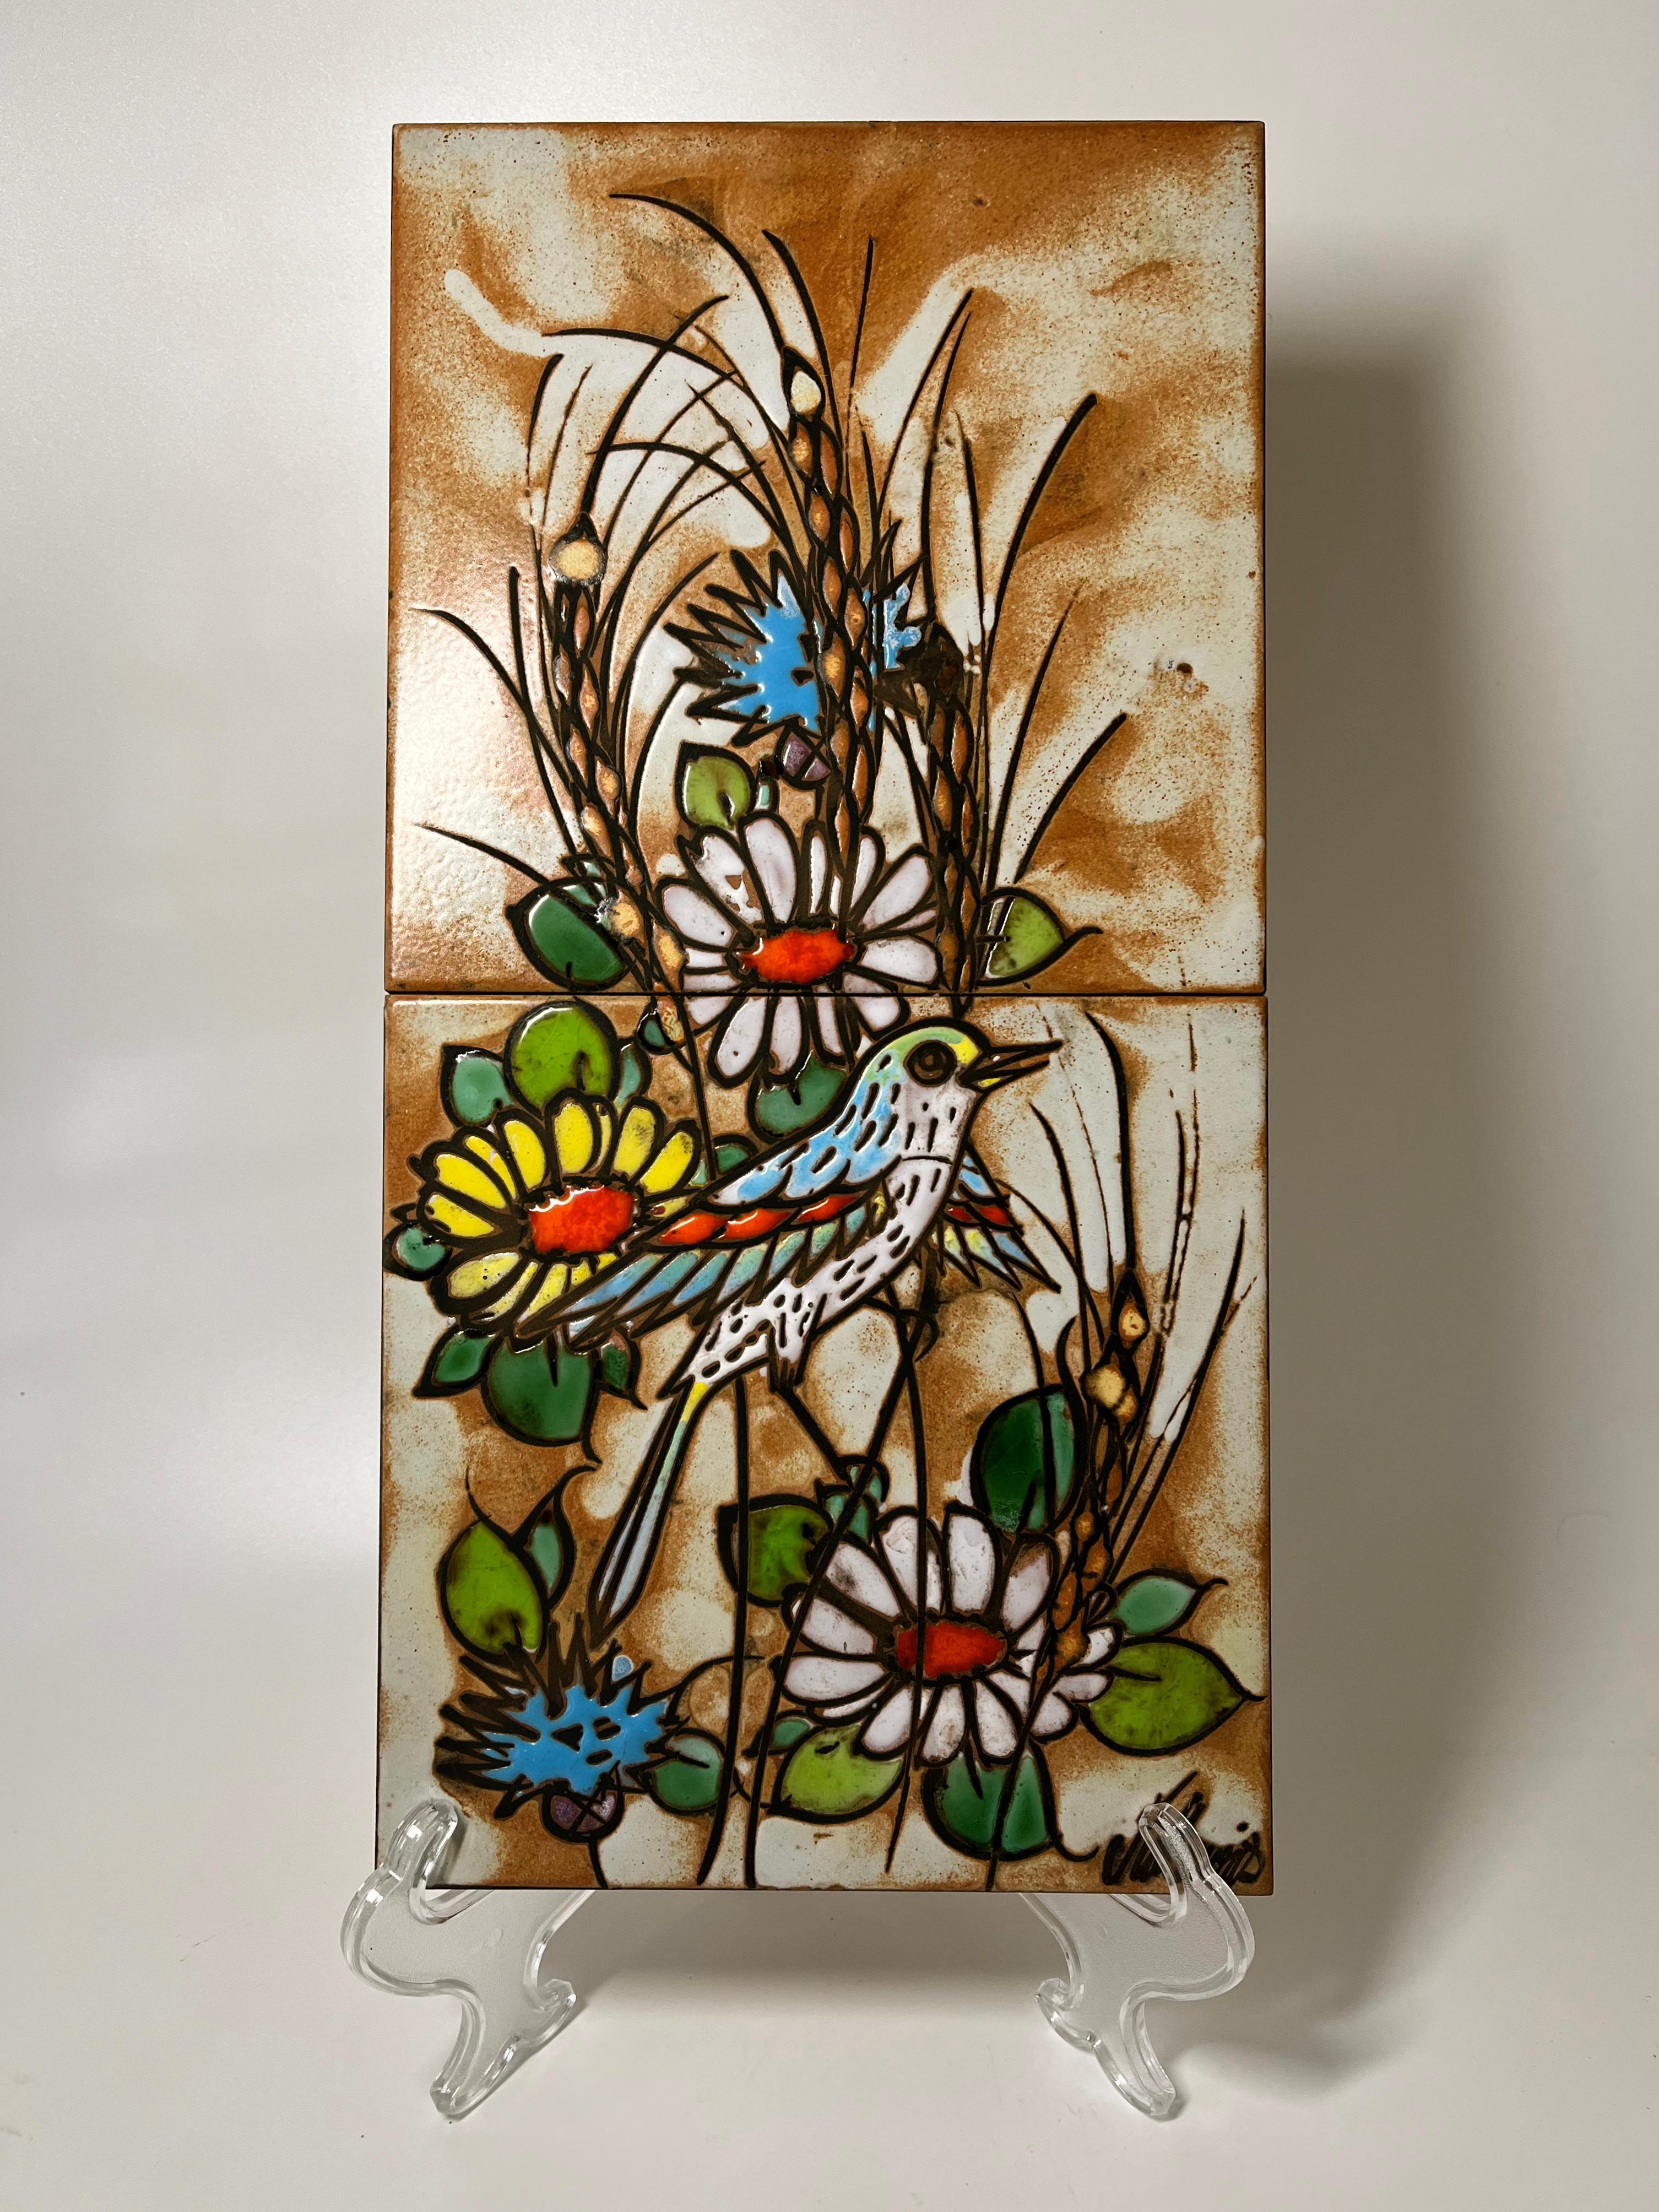 Hand-Painted Songbird and Daisies Vallauris Glazed Ceramic Tiles Enamel Wall Decoration c1960 For Sale